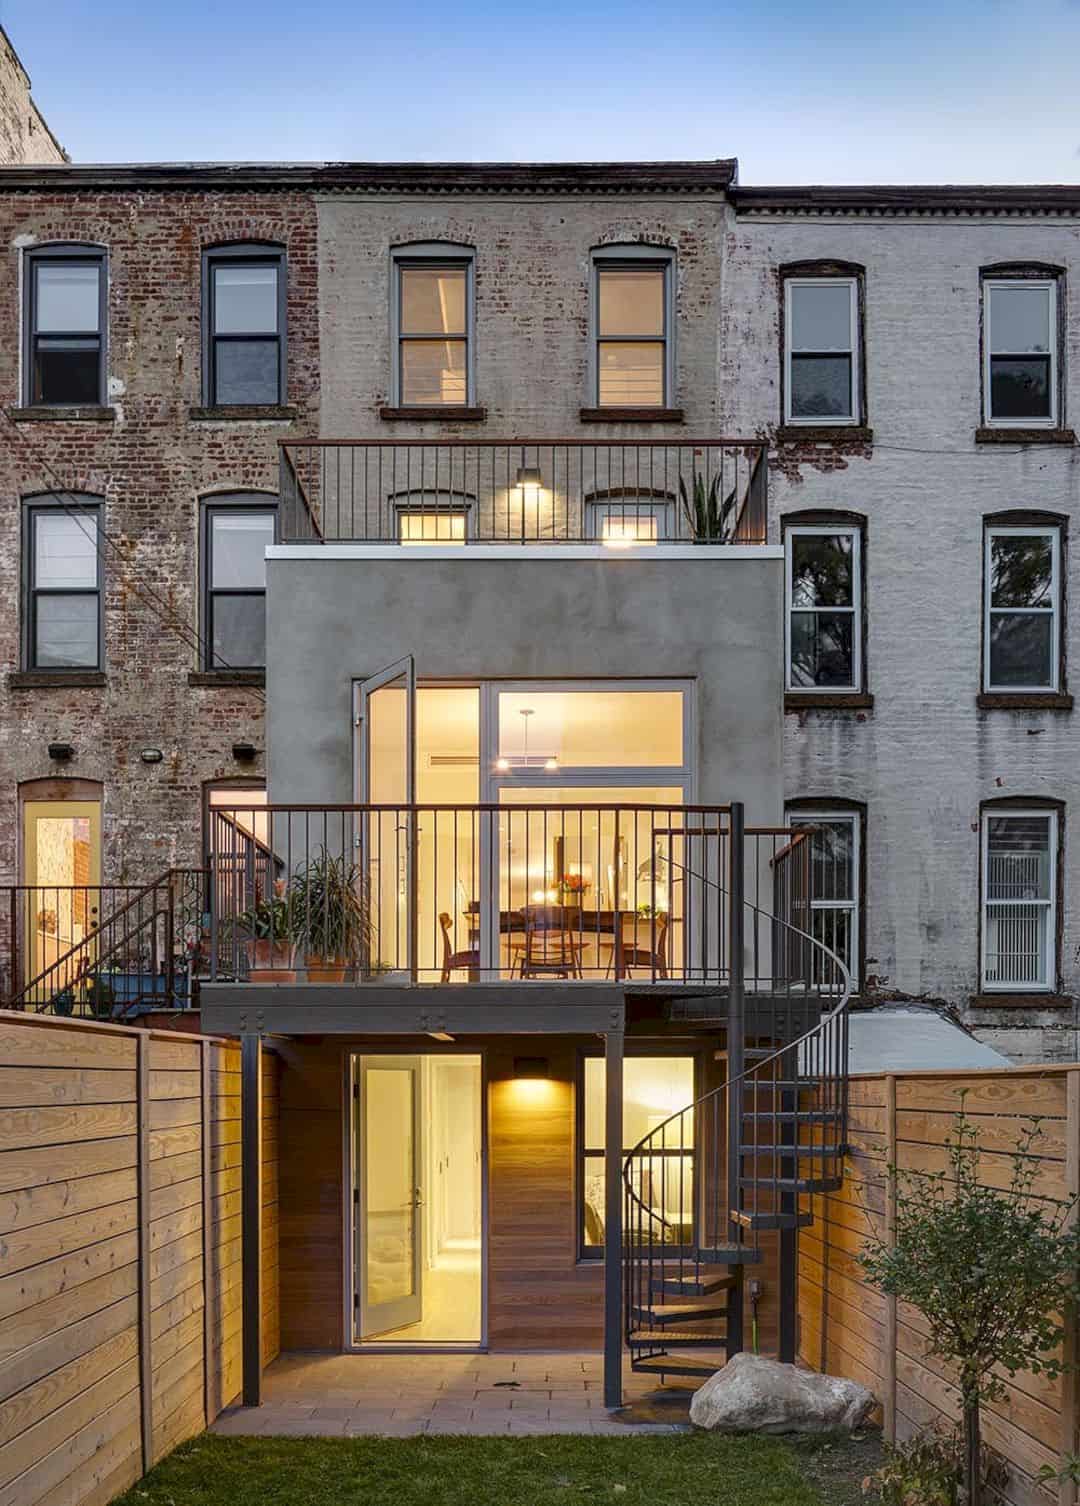 The Renovation Of 12 Foot Wide Rowhouse In Brooklyn By Barker Freeman 2